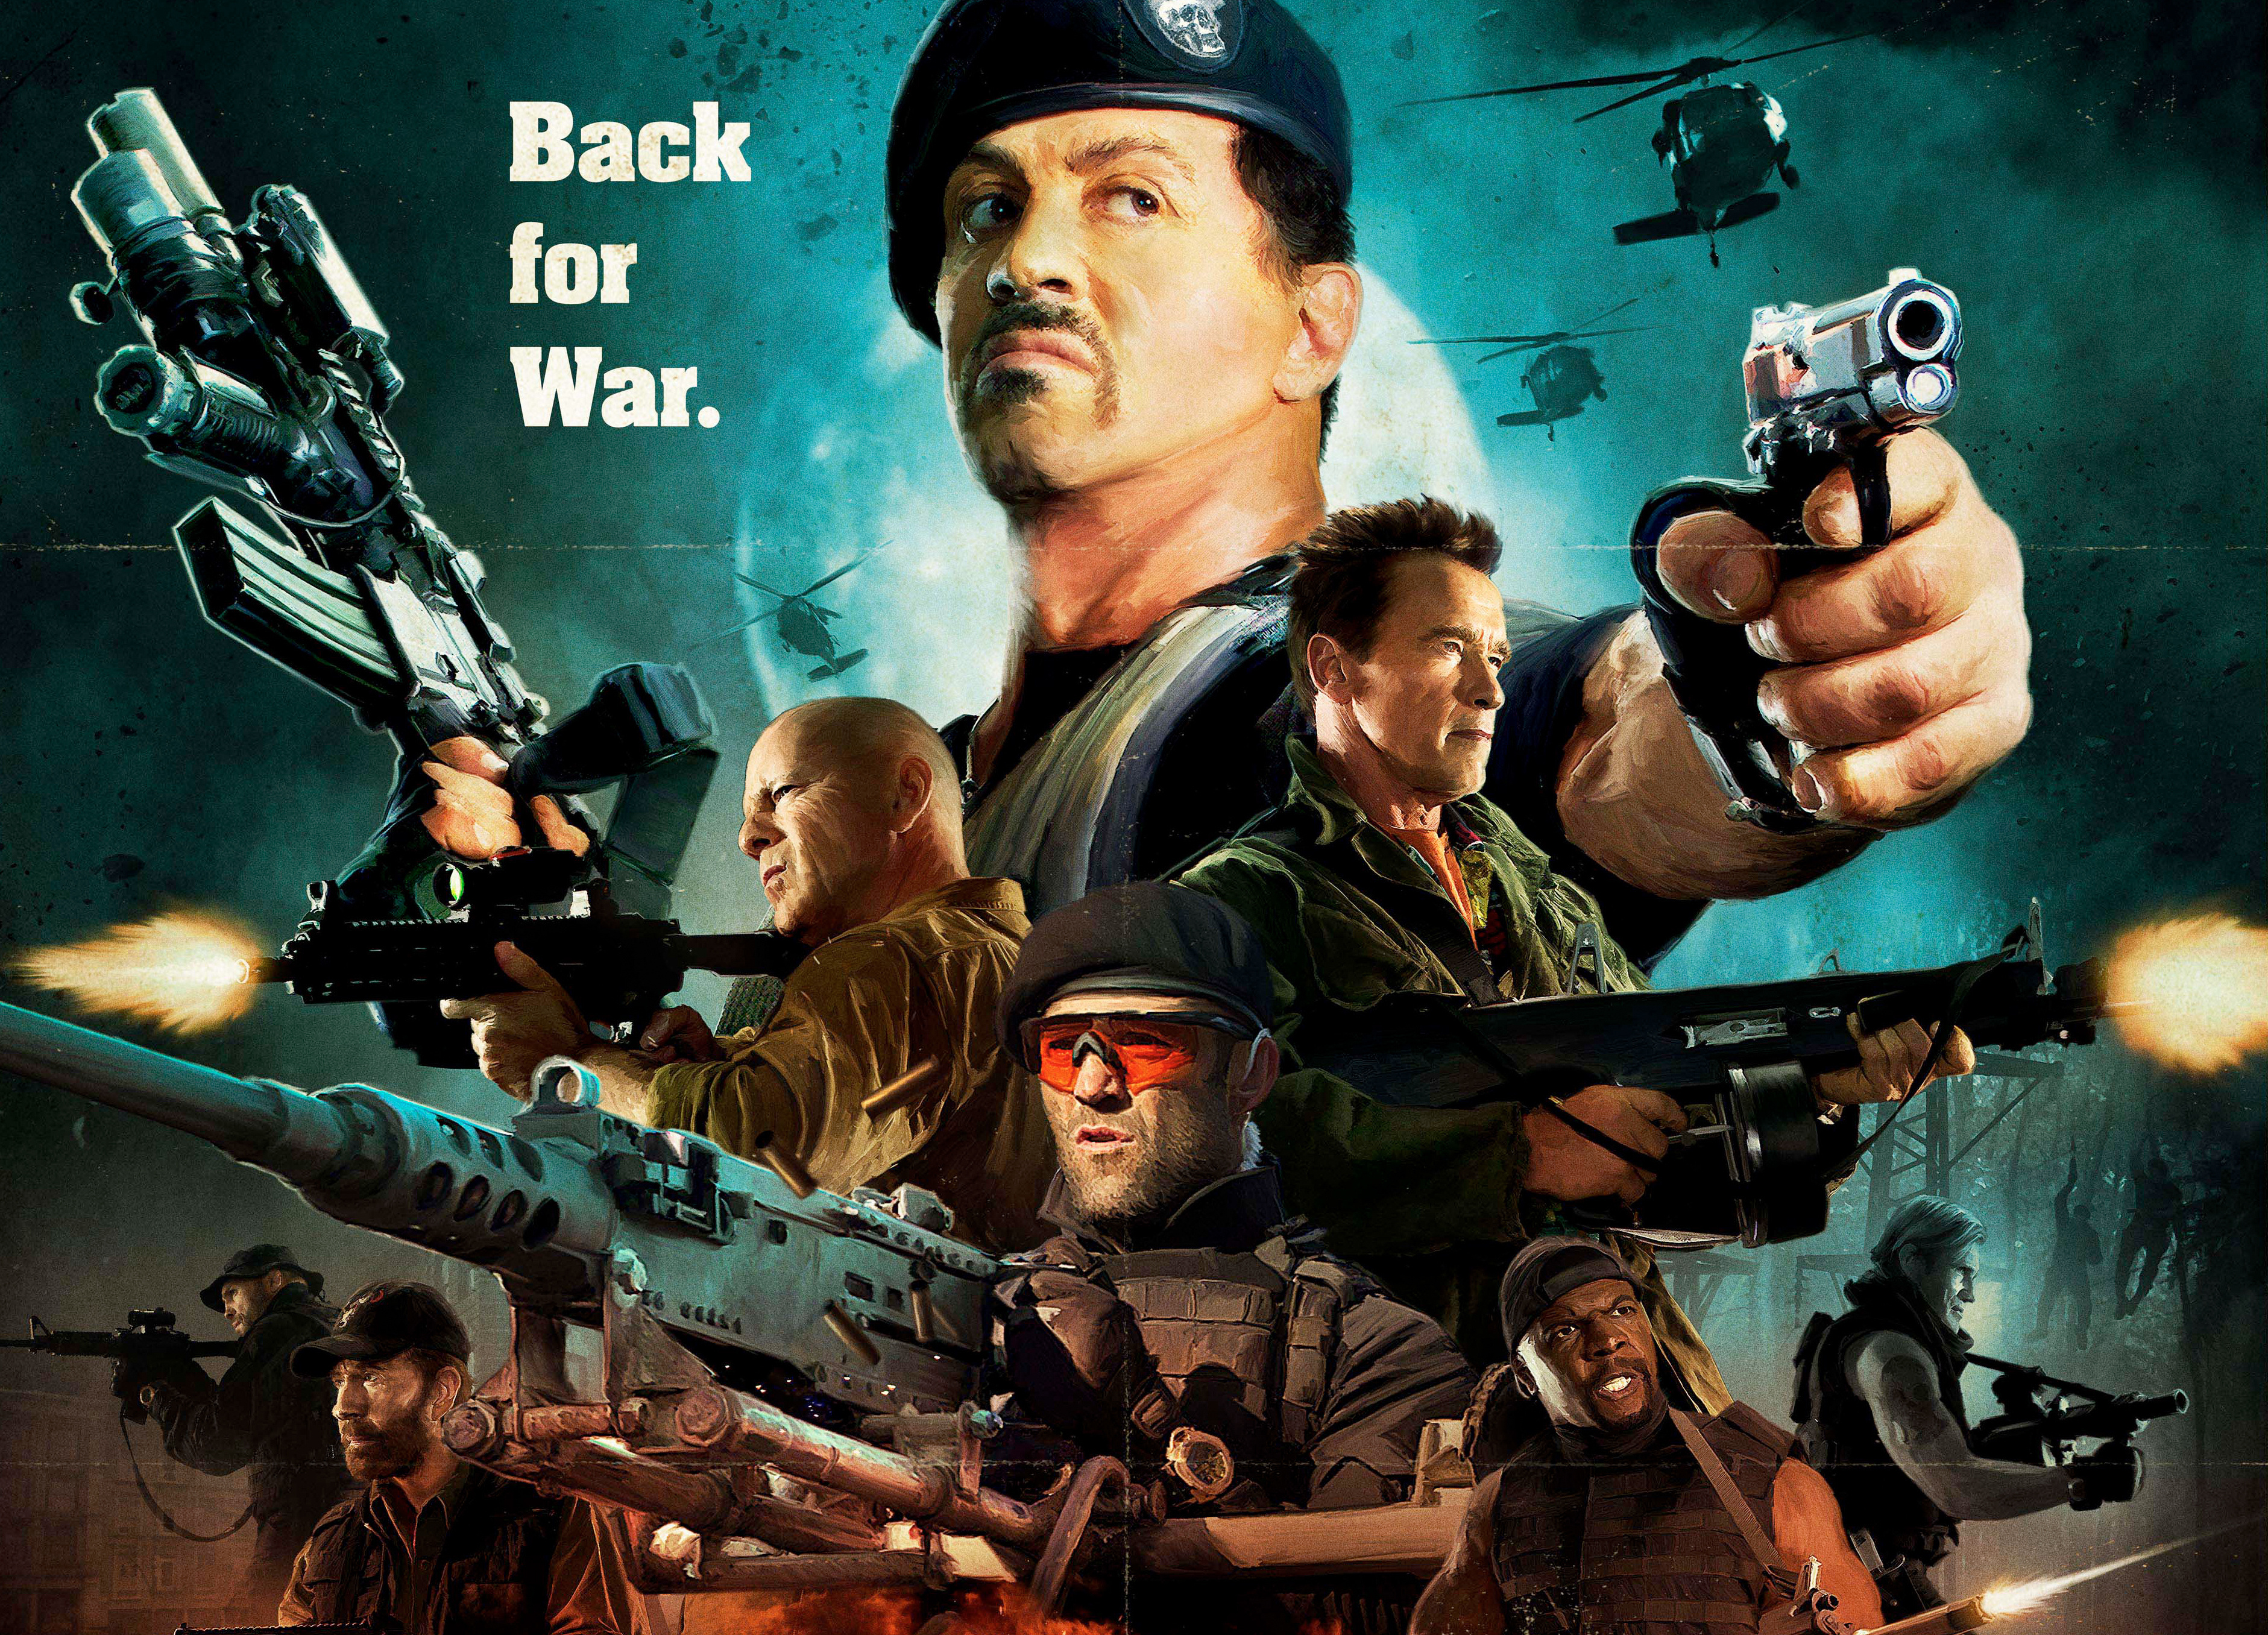 the expendables, movie, the expendables 2, arnold schwarzenegger, barney ross, booker (the expendables), bruce willis, chuck norris, church (the expendables), dolph lundgren, gunnar jensen, hale caesar, jason statham, lee christmas, randy couture, sylvester stallone, terry crews, toll road, trench (the expendables)